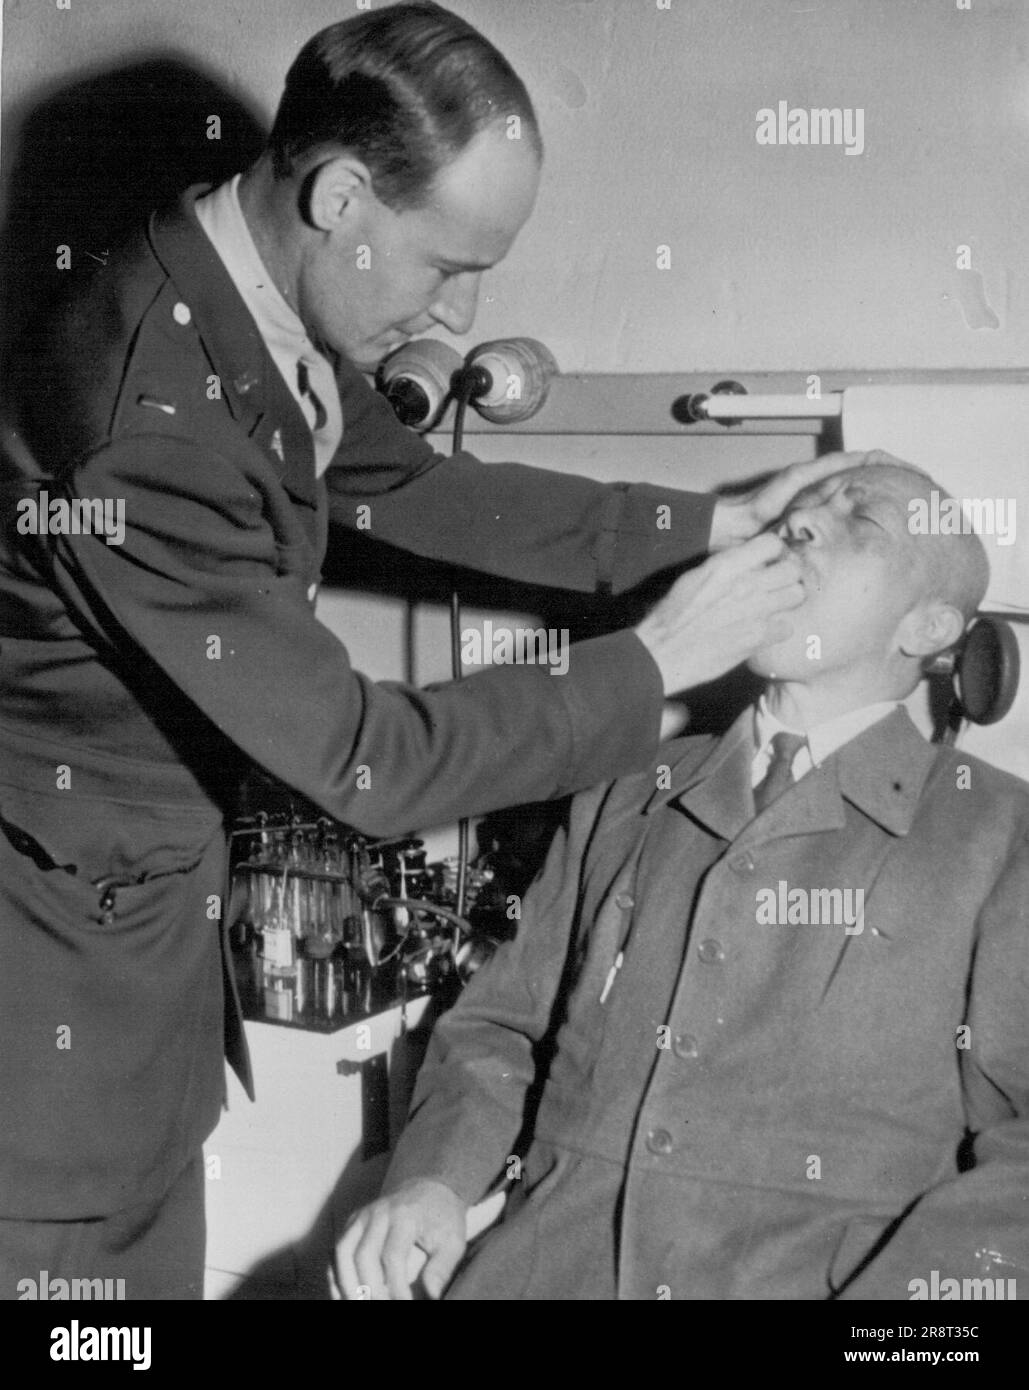 Tojo Gets a Health Check-Up -- Lt. F.X. Paul Tinker of Baltimore, Md., gives Hideki Tojo, Japan's wartime Prime Minister, a health check-up. Tojo currently is on trial on wartime criminal charges. November 06, 1946. (Photo by AP Wirephoto). Stock Photo